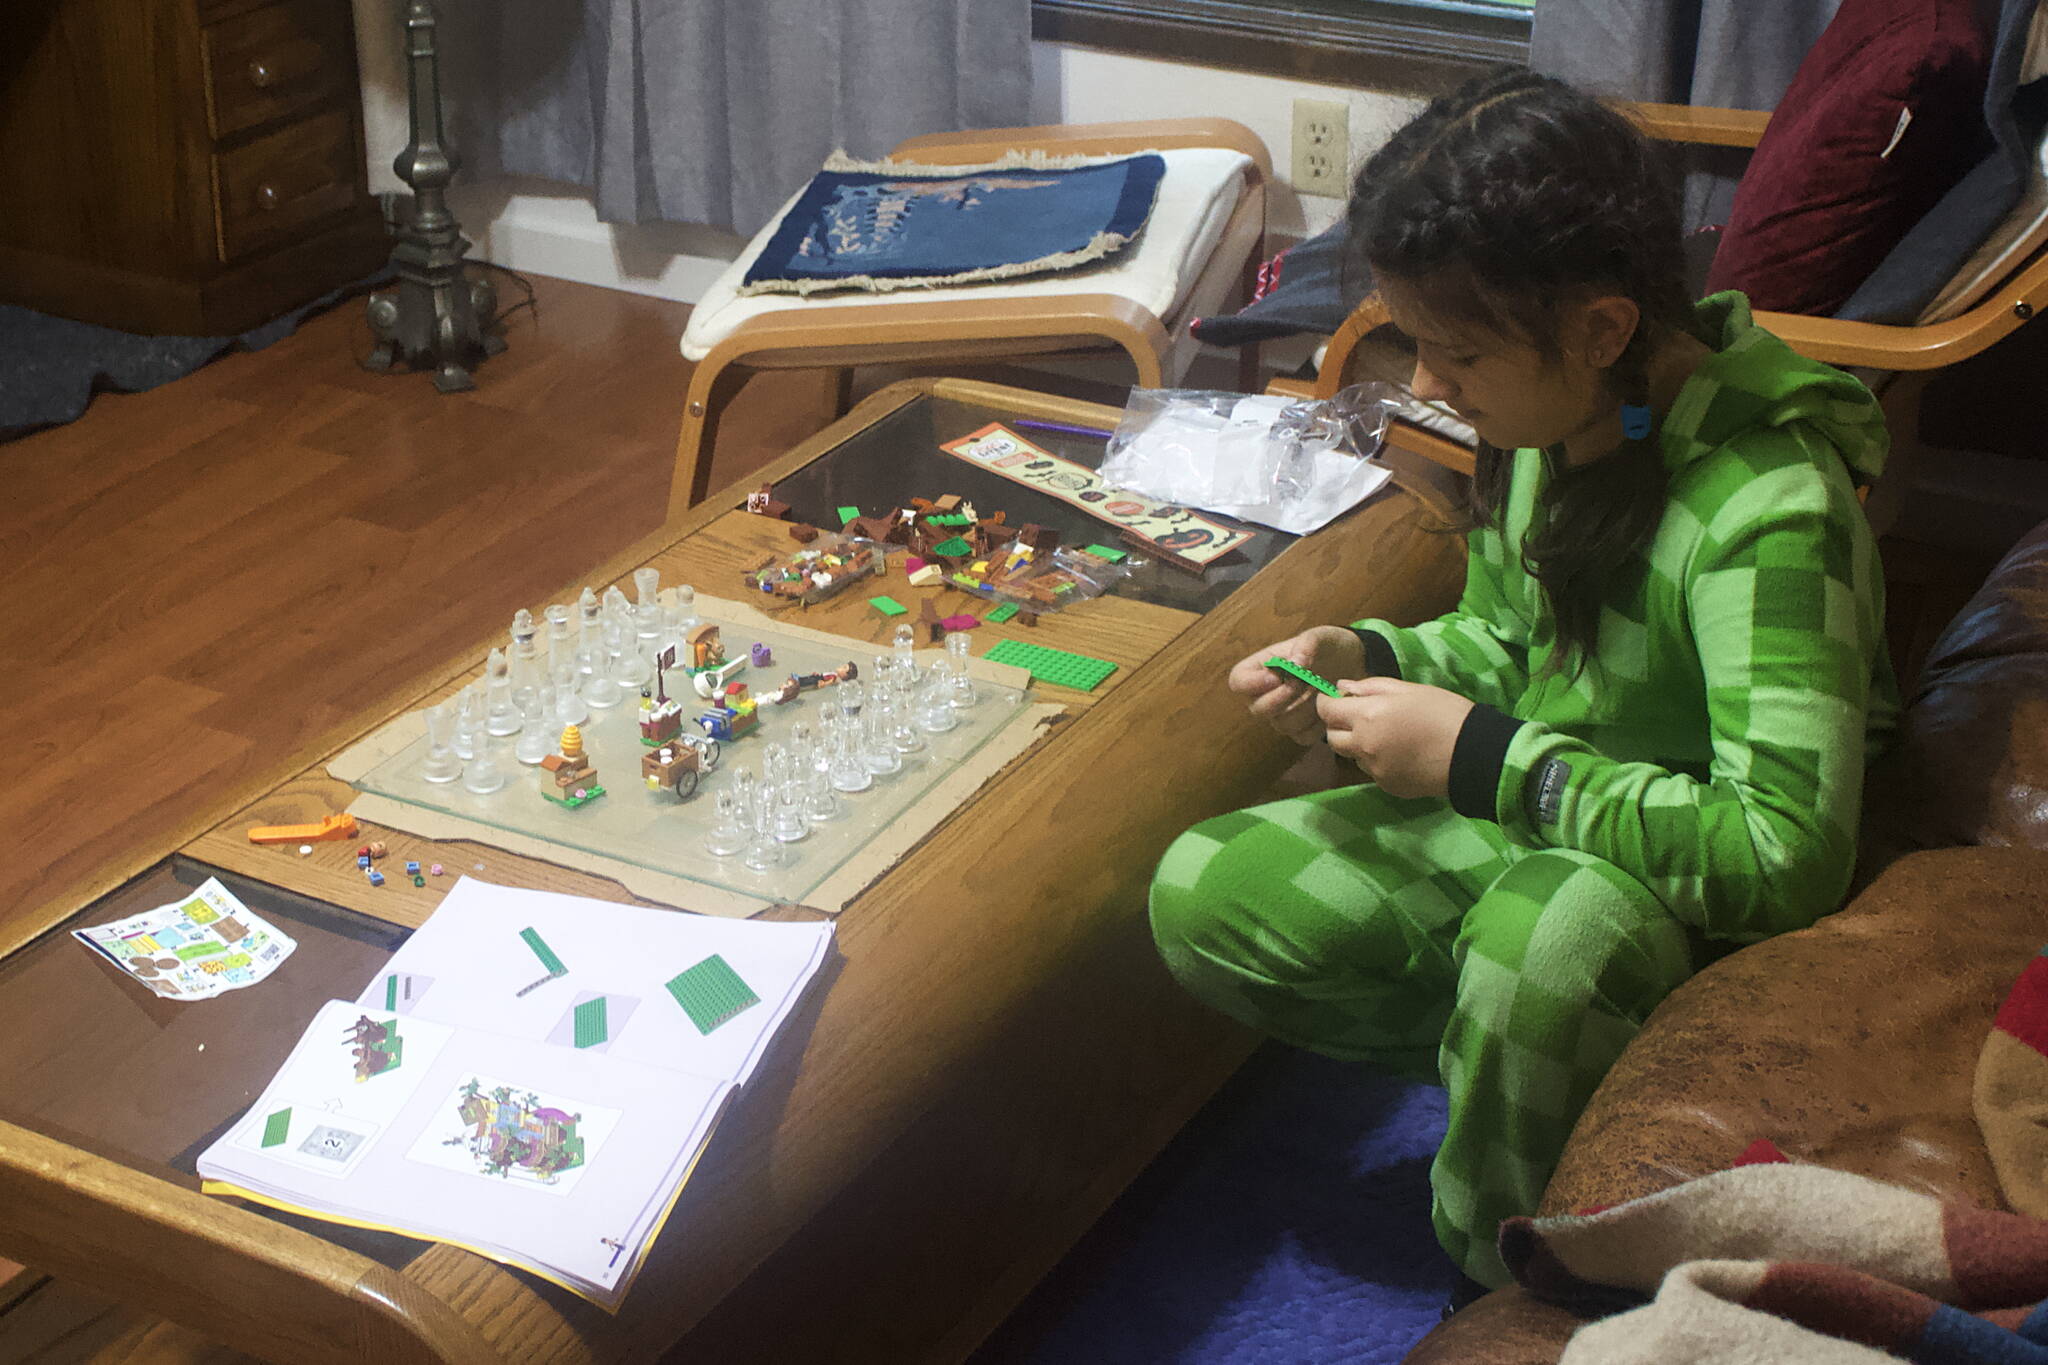 Mark Sabbatini / Juneau Empire 
Irynka Pomynalnyi, 10, plays with a chess set, Legos and other items in her family’s Mendenhall Valley home on Oct. 14, about three weeks after the family arrived in Juneau after fleeing the war in their homeland Ukraine.